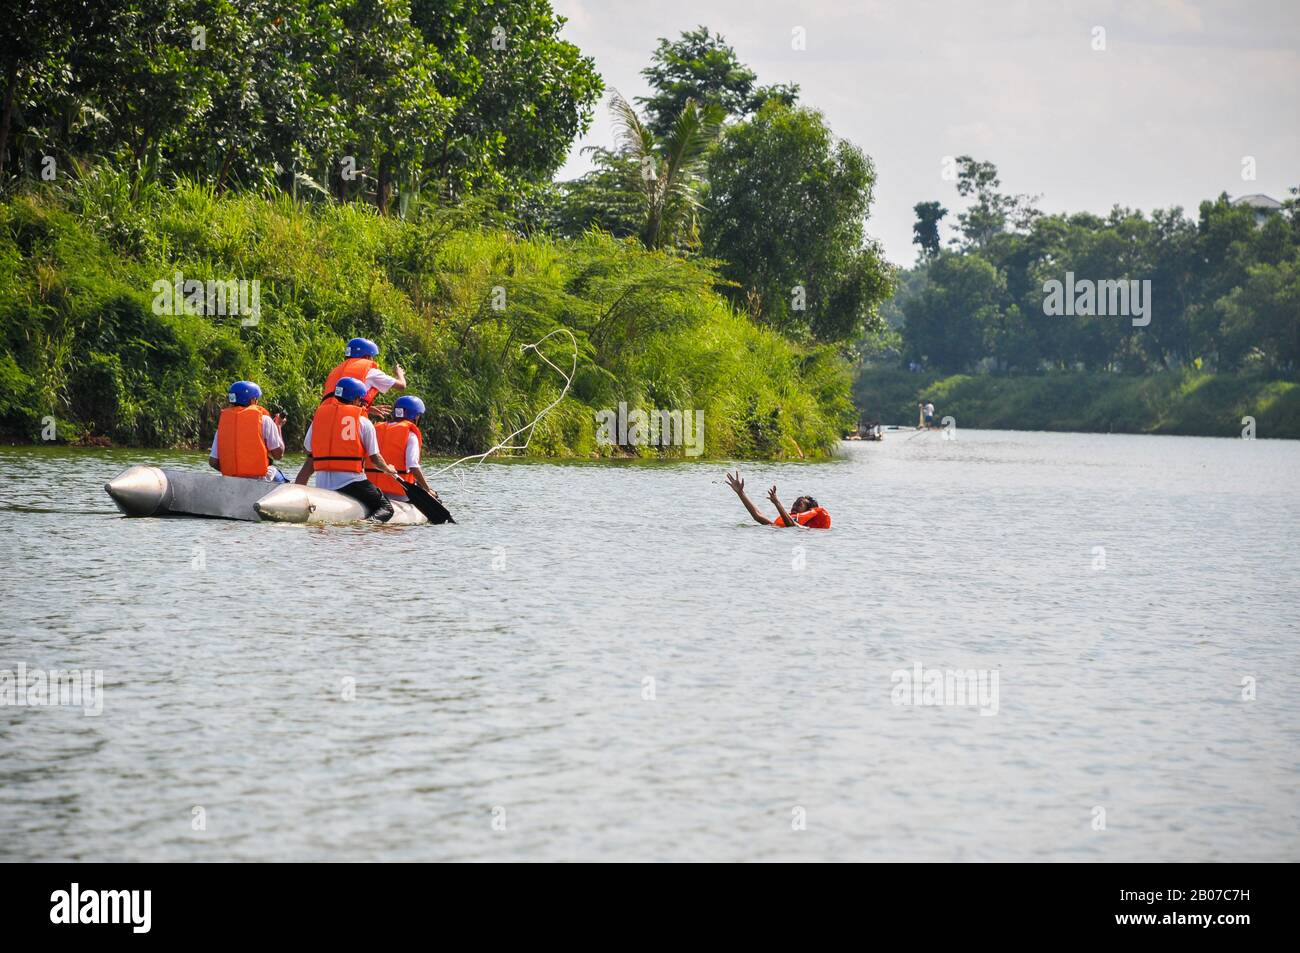 South Tangerang, Indonesia - December 14th, 2014: Volunteers doing water rescue training at the Situ Gintung lake in South Tangerang, Indonesia Stock Photo